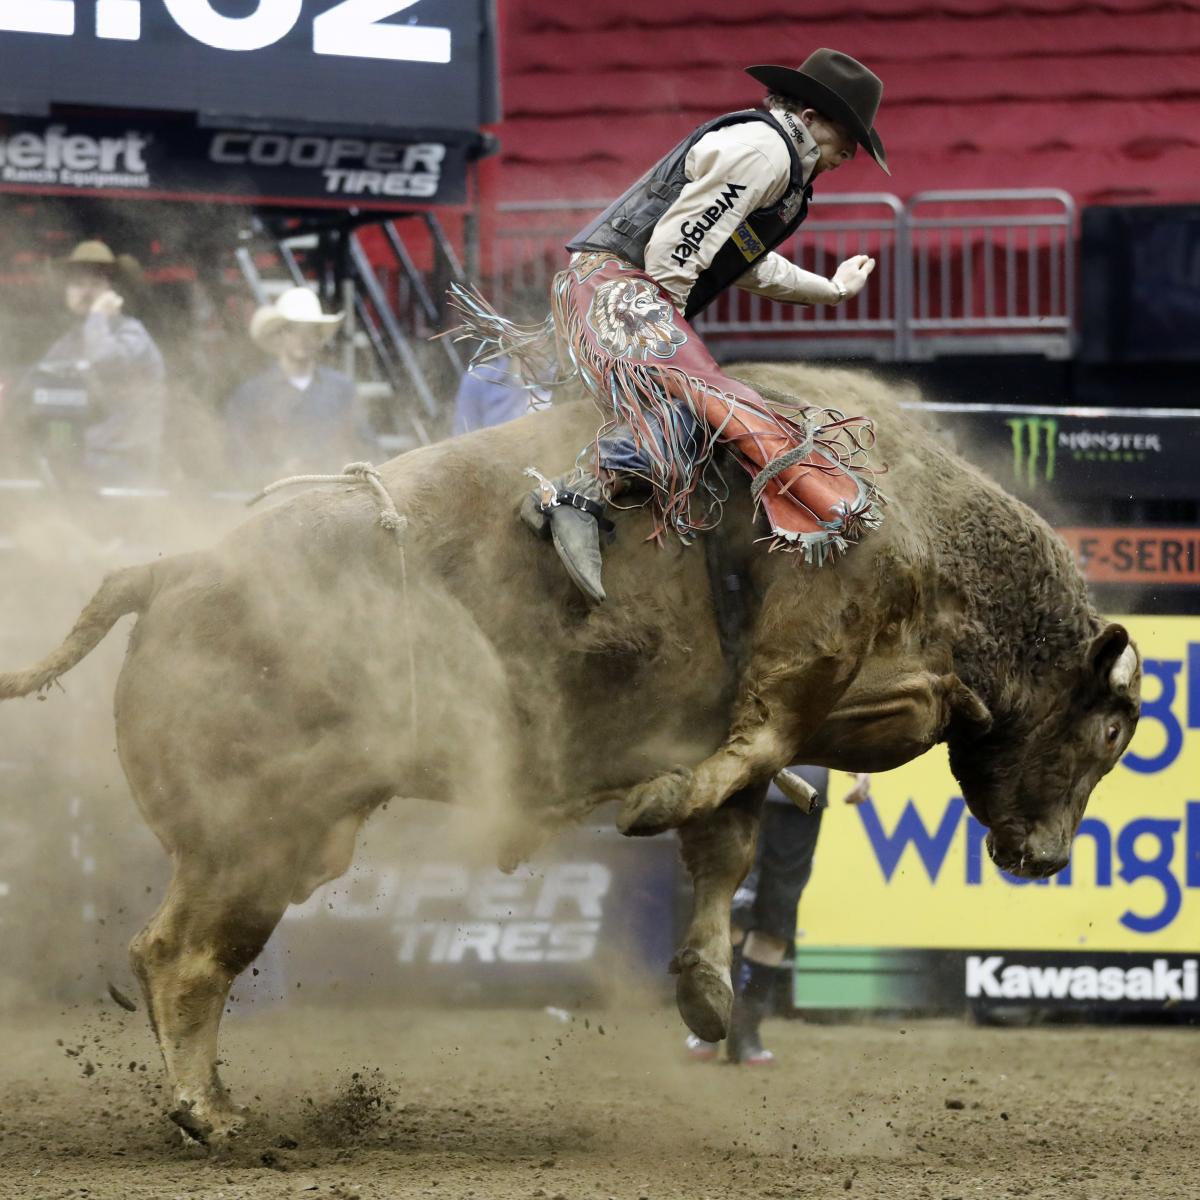 Professional Bull Rider Mason Lowe Dies At 25 After Bull Stomped On His Chest News Scores